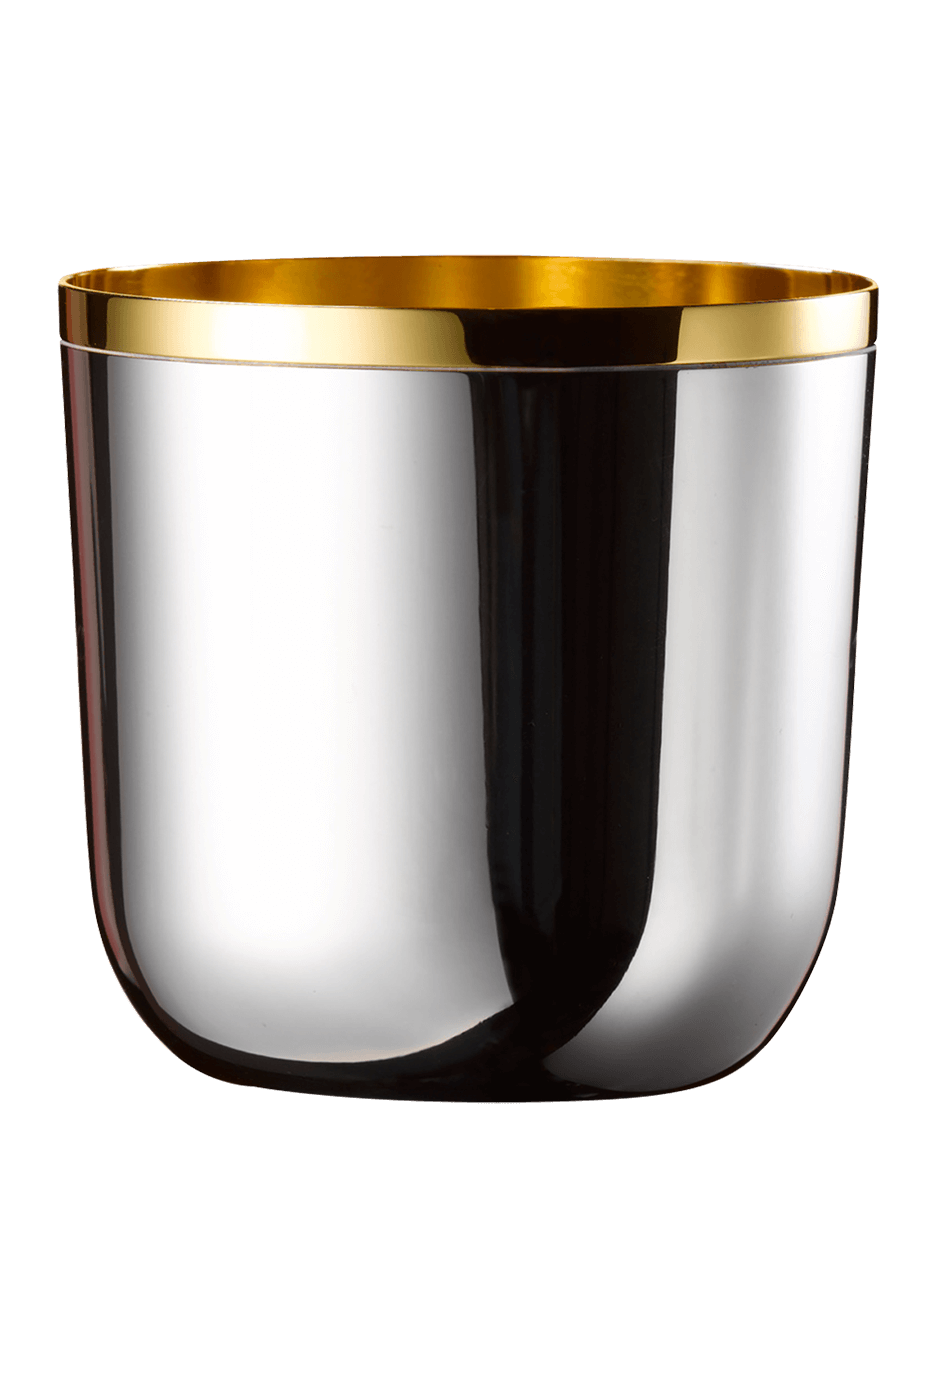 Alta Tumbler, Inside Gold (90g silverplated)